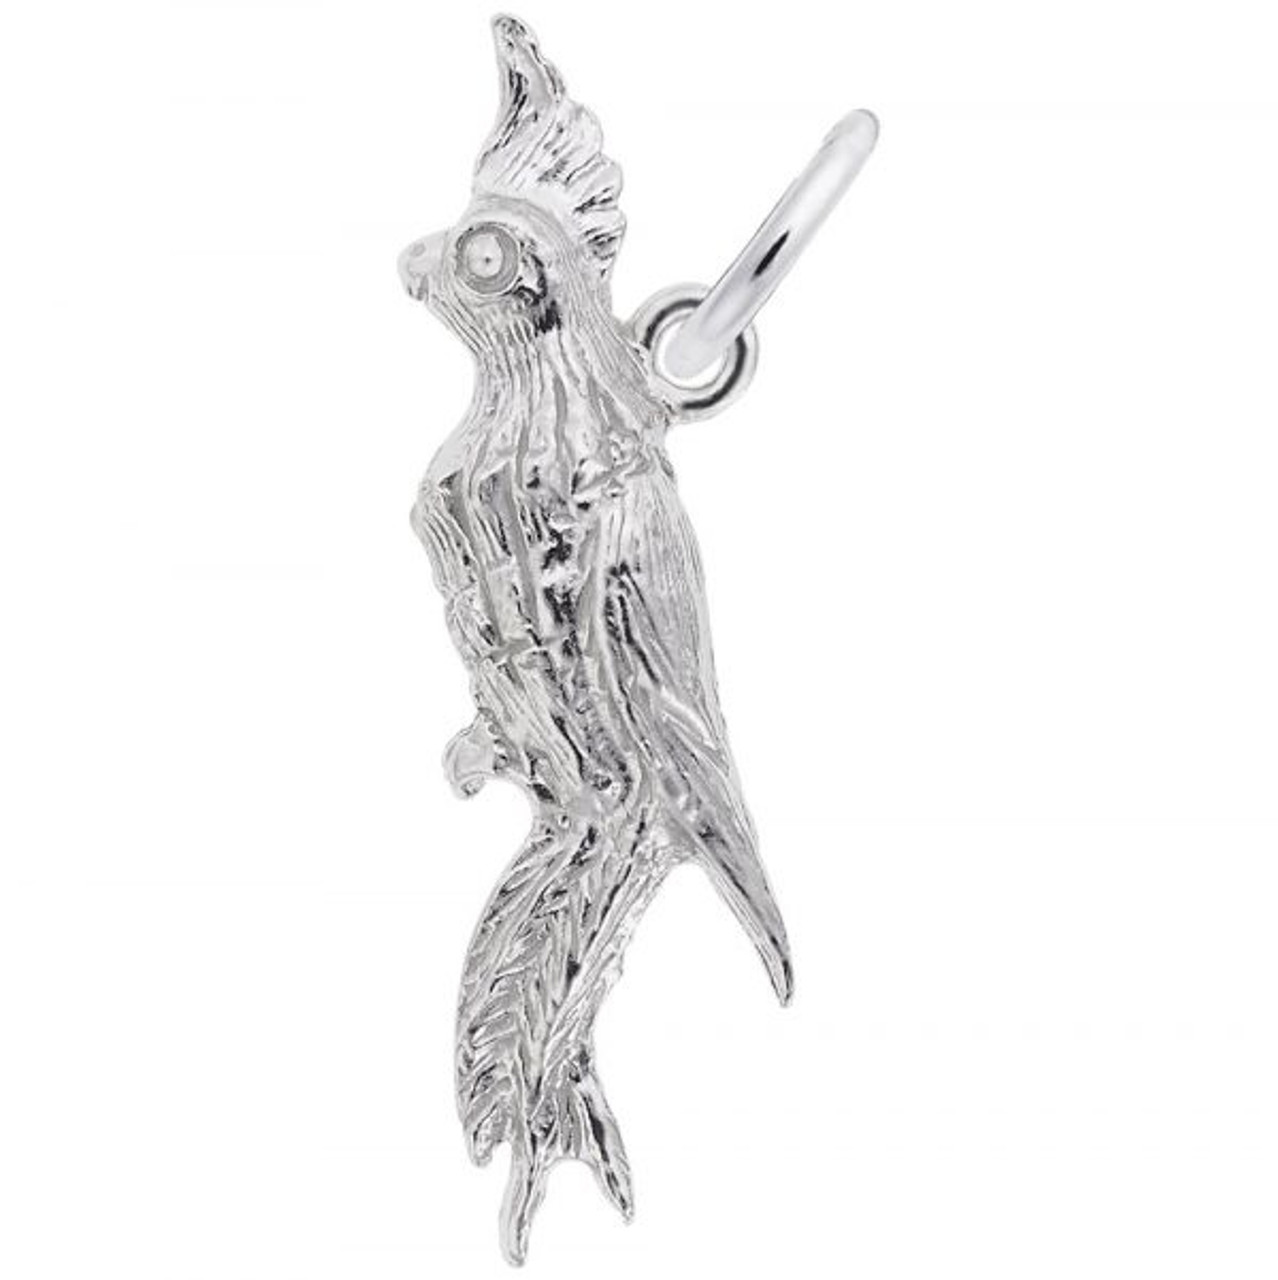 Cockatoo Silver Charm - Sterling Silver and 14k White Gold